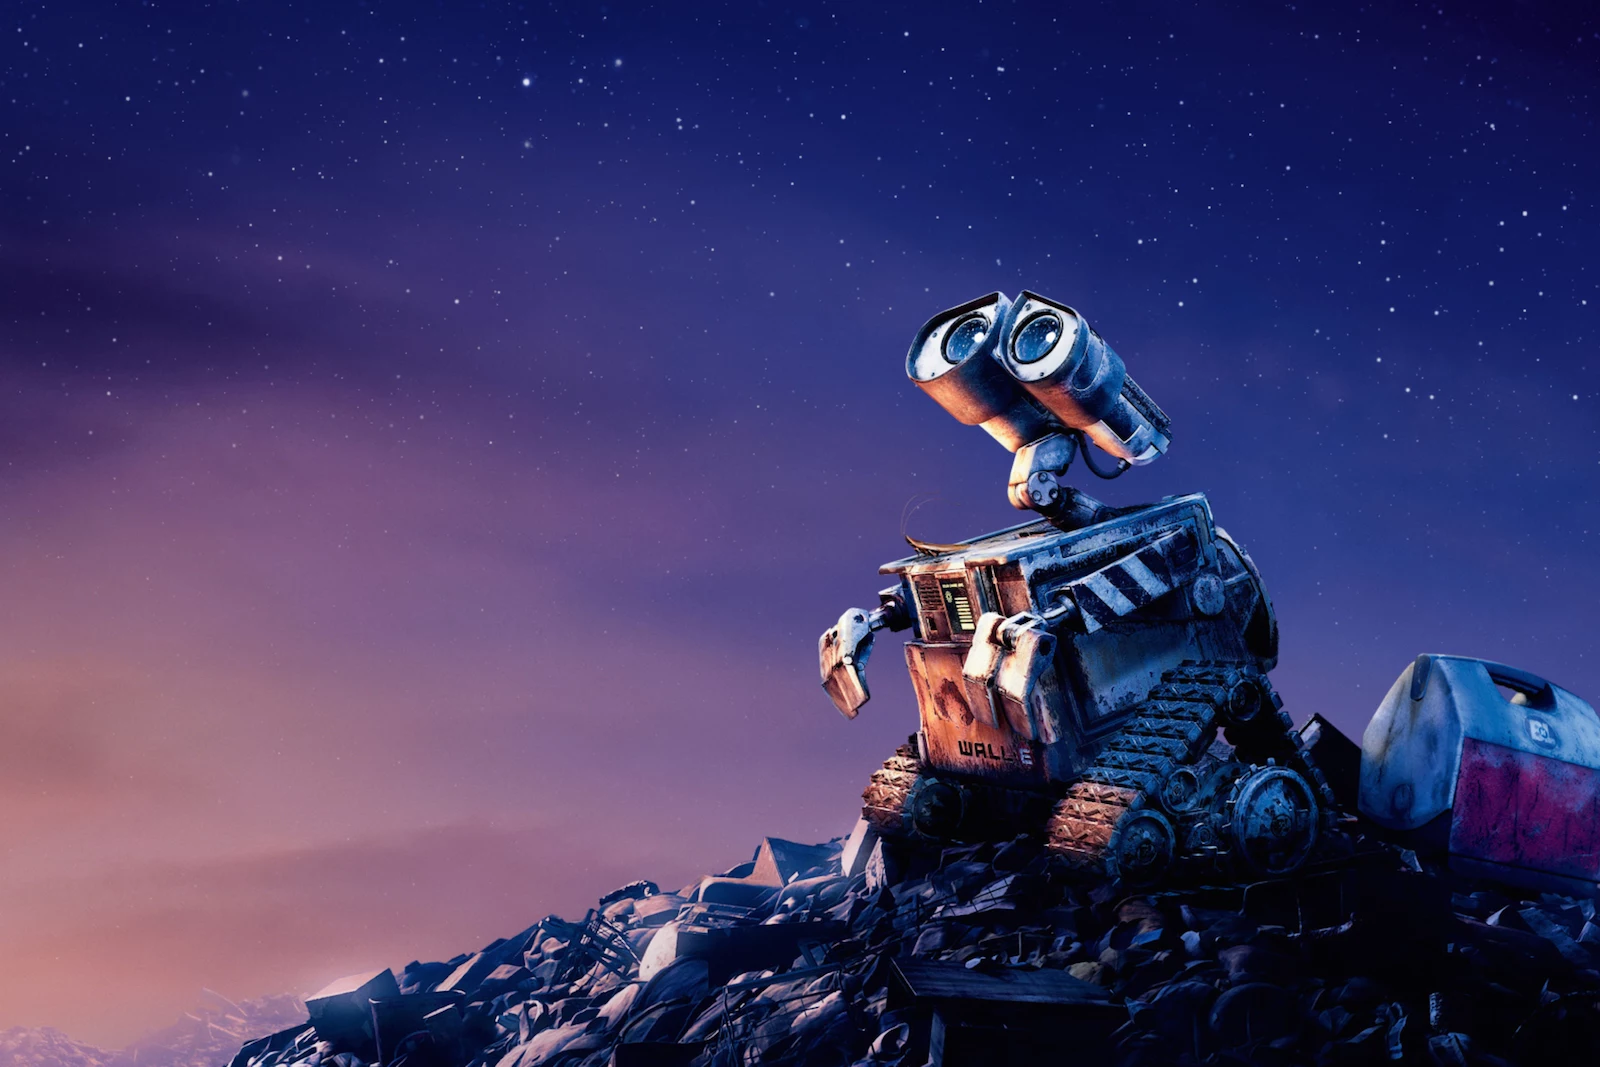 10 Years Later, ‘WALL-E’ Is Animation’s Most Human Love Story